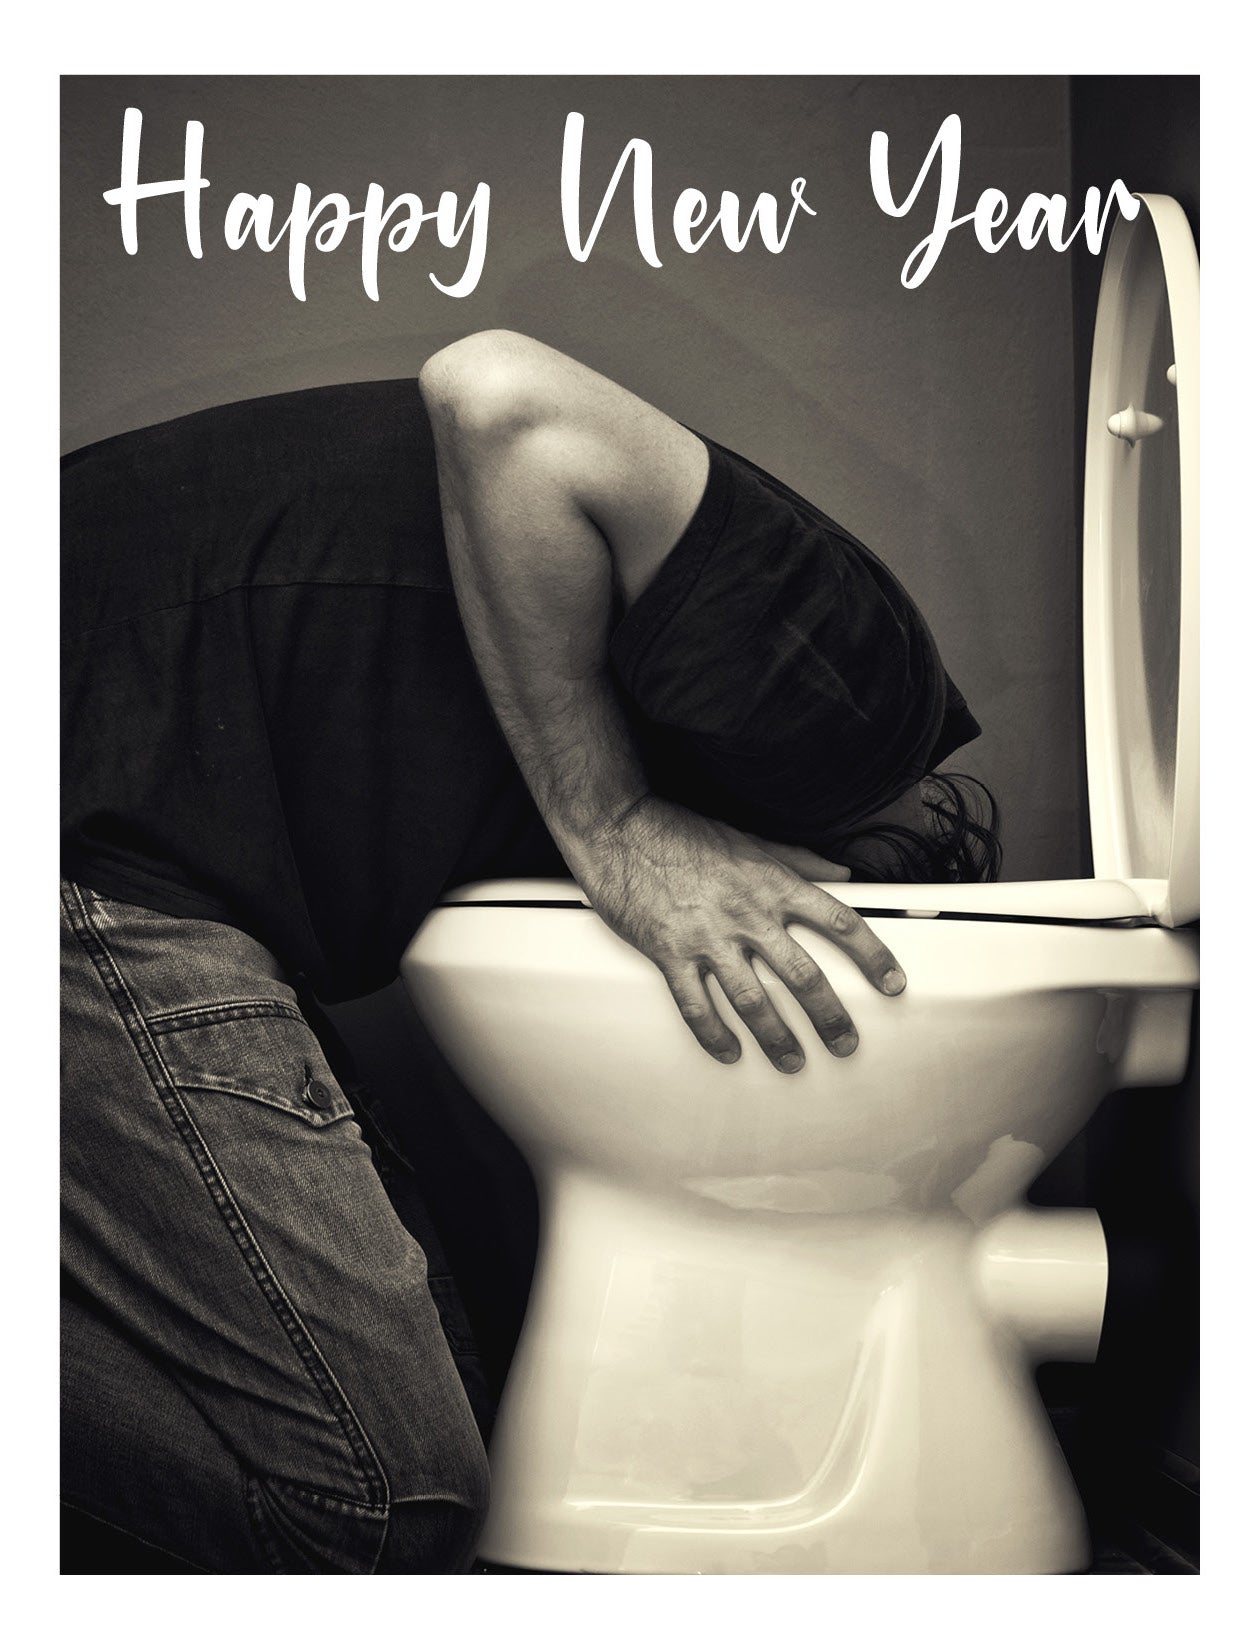 The On the Toilet Happy New Year Card